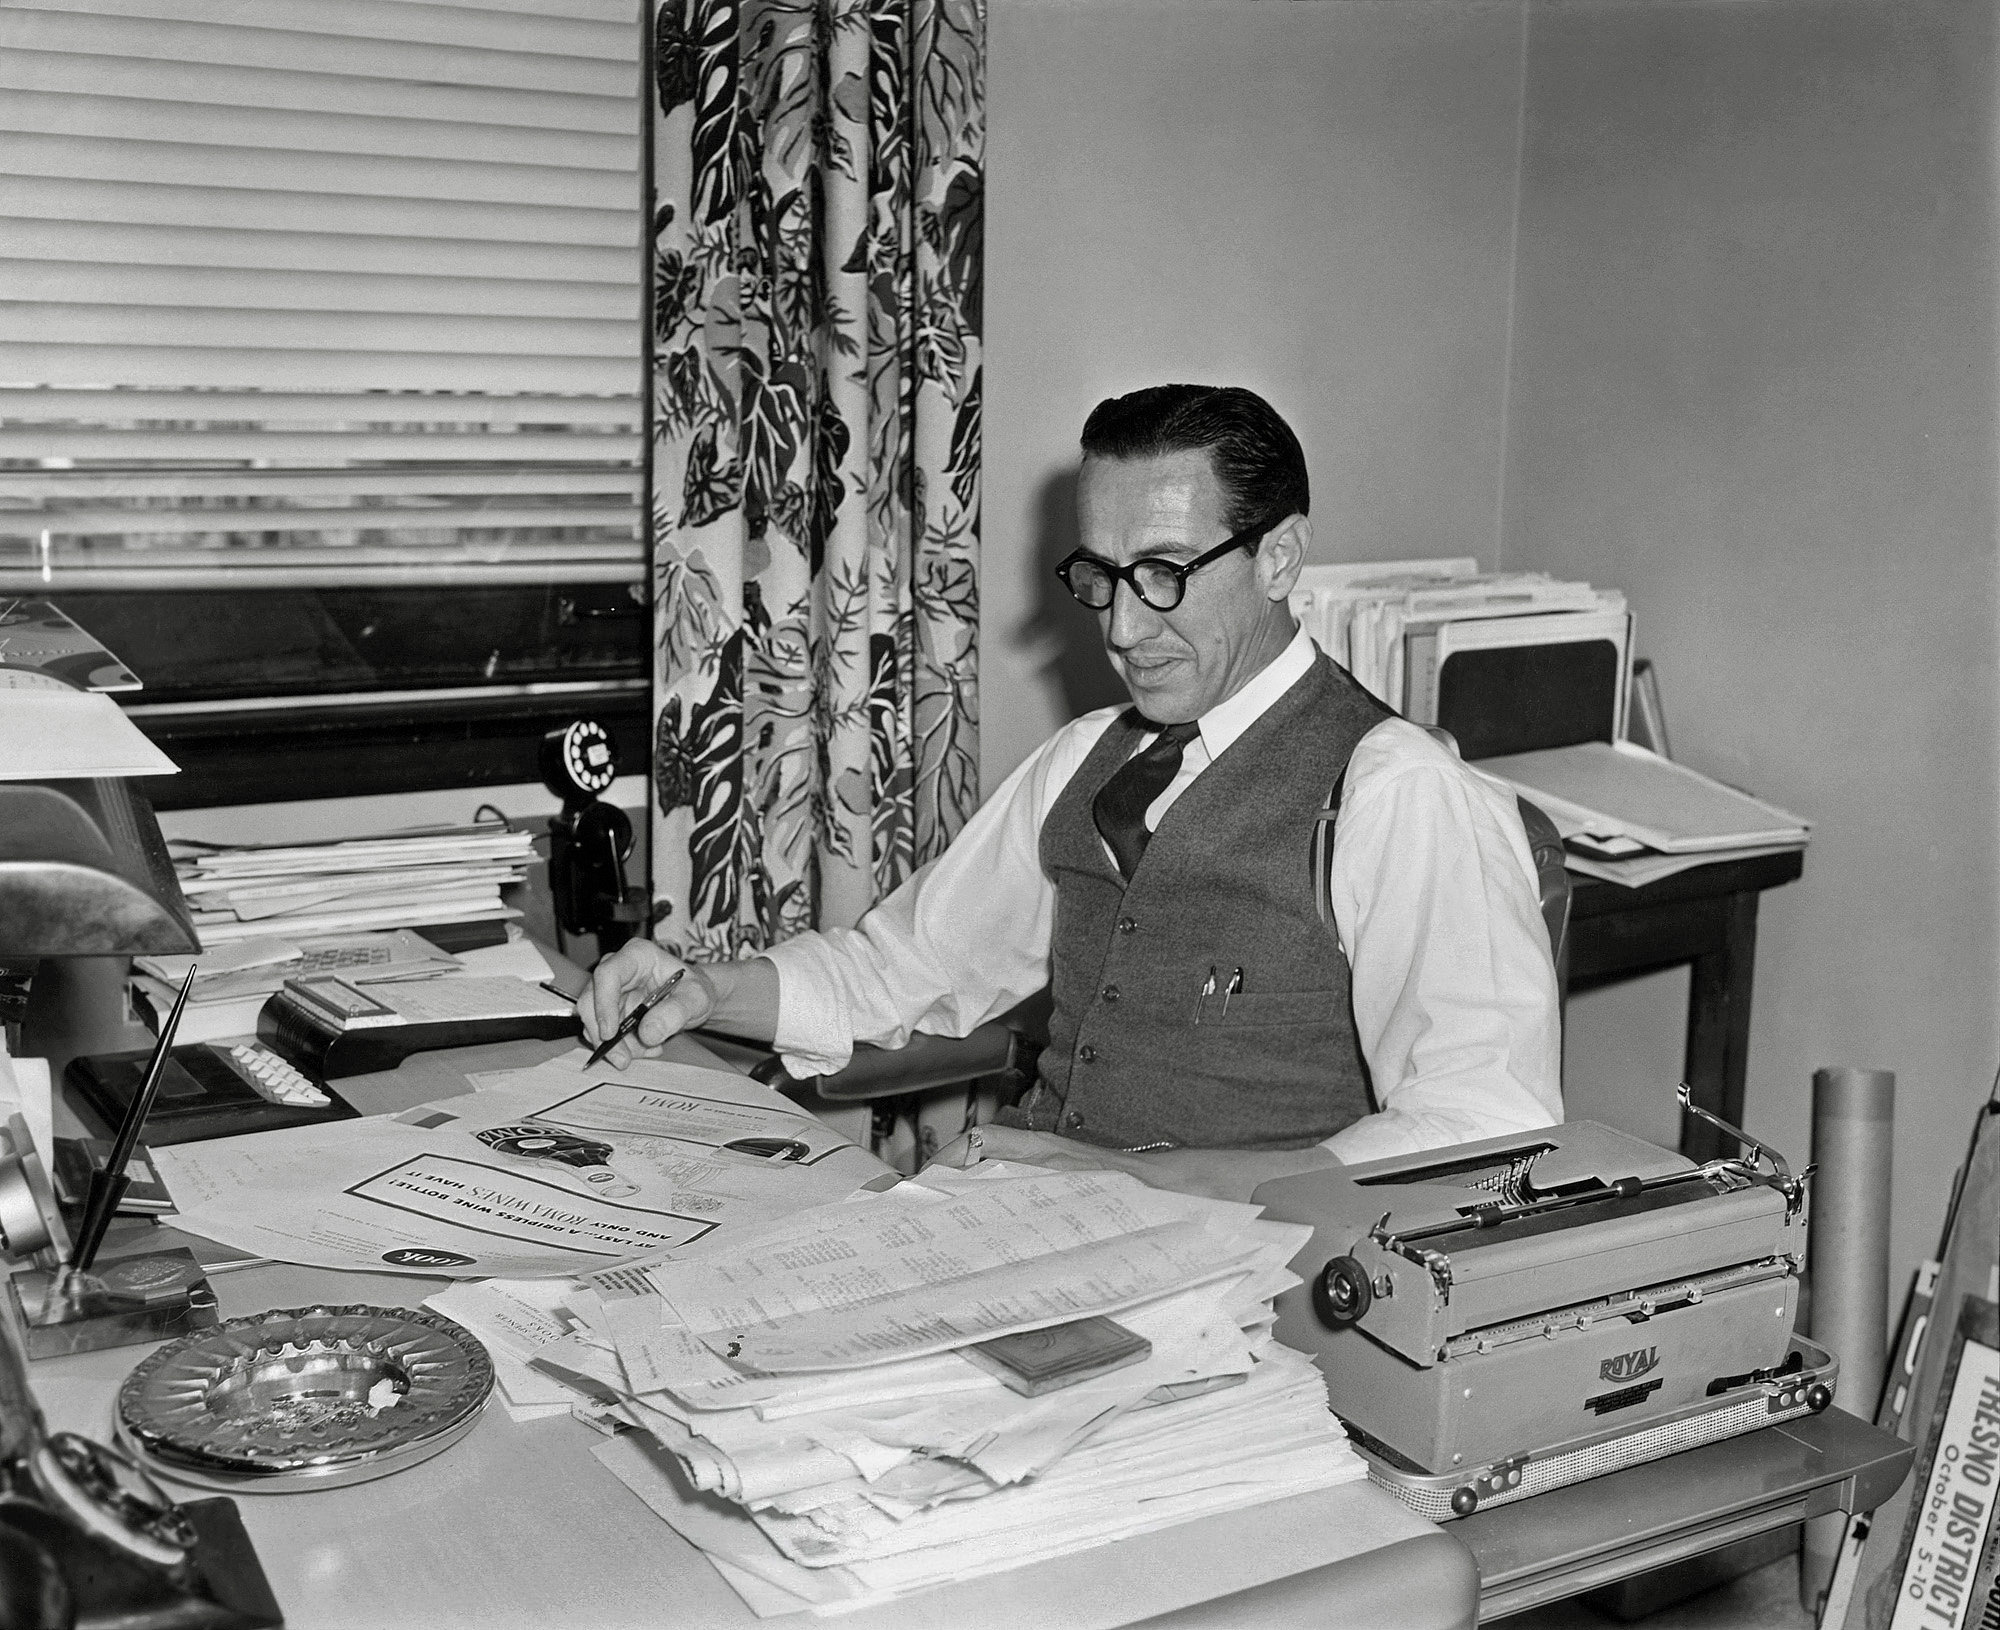 Back to my Uncle Albert in his office at the Foote, Cone and Belding advertising agency in San Francisco's Russ Building about 1954. Amid a fine selection of period office accouterments, including a space-saver phone and cigarette ashes, he's working on this ad. As Vice-President and Production Manager, he was in charge of layout, design, graphics and typography, and also for such accounts as Southern Pacific, Dole Pineapple and Pacific Bell.

Albert's interest in fine printing and typography led to his amassing a significant collection of manuscripts, first editions, prints and other art, much of which now resides at institutions like Stanford, UCLA and Berkeley. In particular, his collection of over 1000 books, drawings, etchings and correspondence of the English sculptor, printmaker and typeface designer (as in Gill Sans) Eric Gill is at the Gleeson Library of the University of San Francisco. View full size.